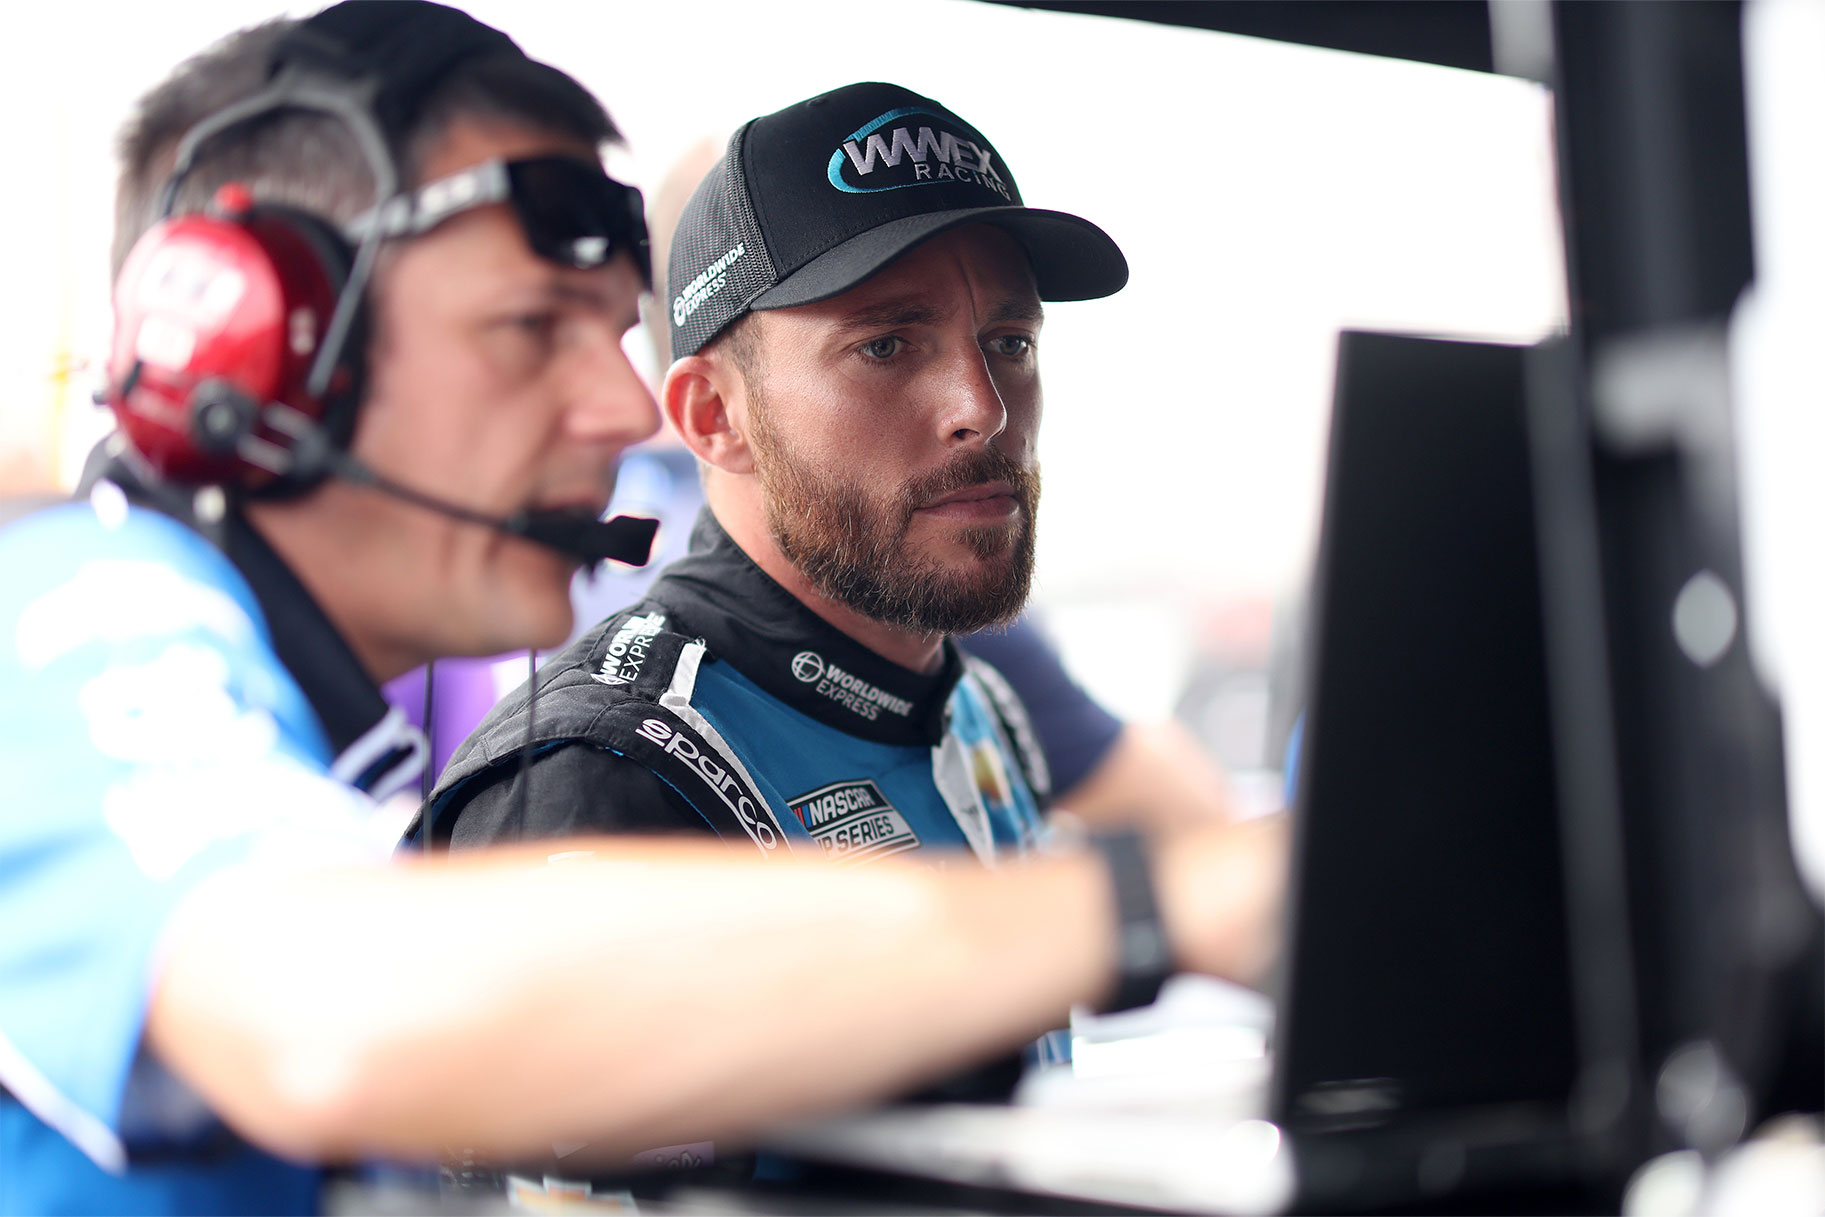 Ross Chastain, driver of the #1 Worldwide Express Chevrolet, and a crew member view a monitor on the grid during practice for the NASCAR Cup Series Ambetter 301 at New Hampshire Motor Speedway on July 16, 2022